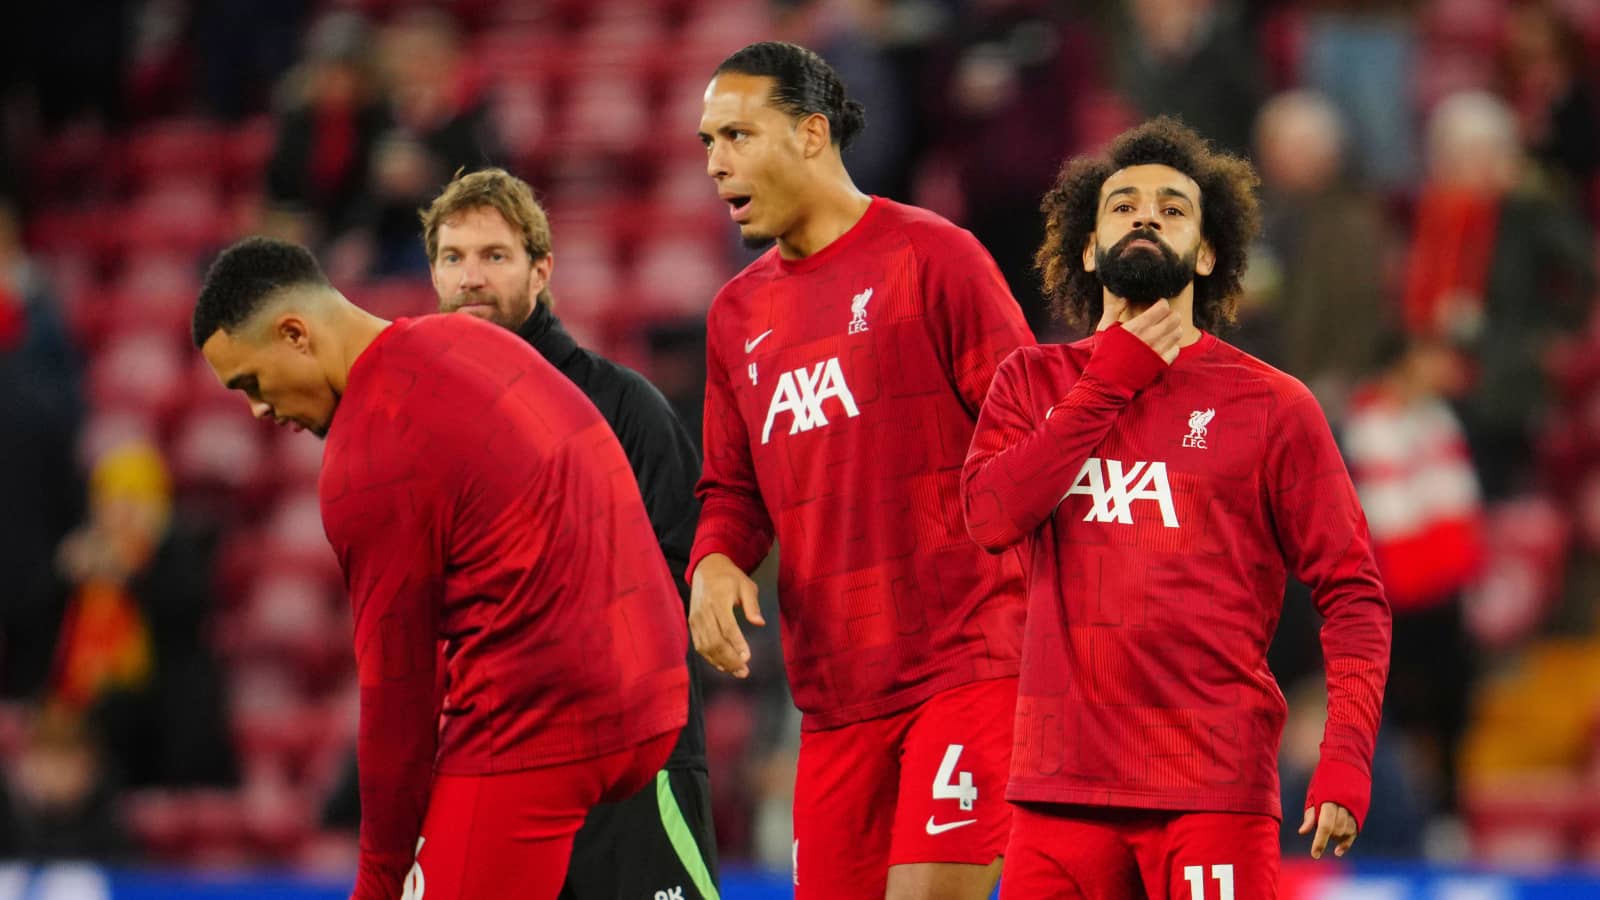 Saudi Arabia make offer for major Liverpool star with contract expiring in 2025